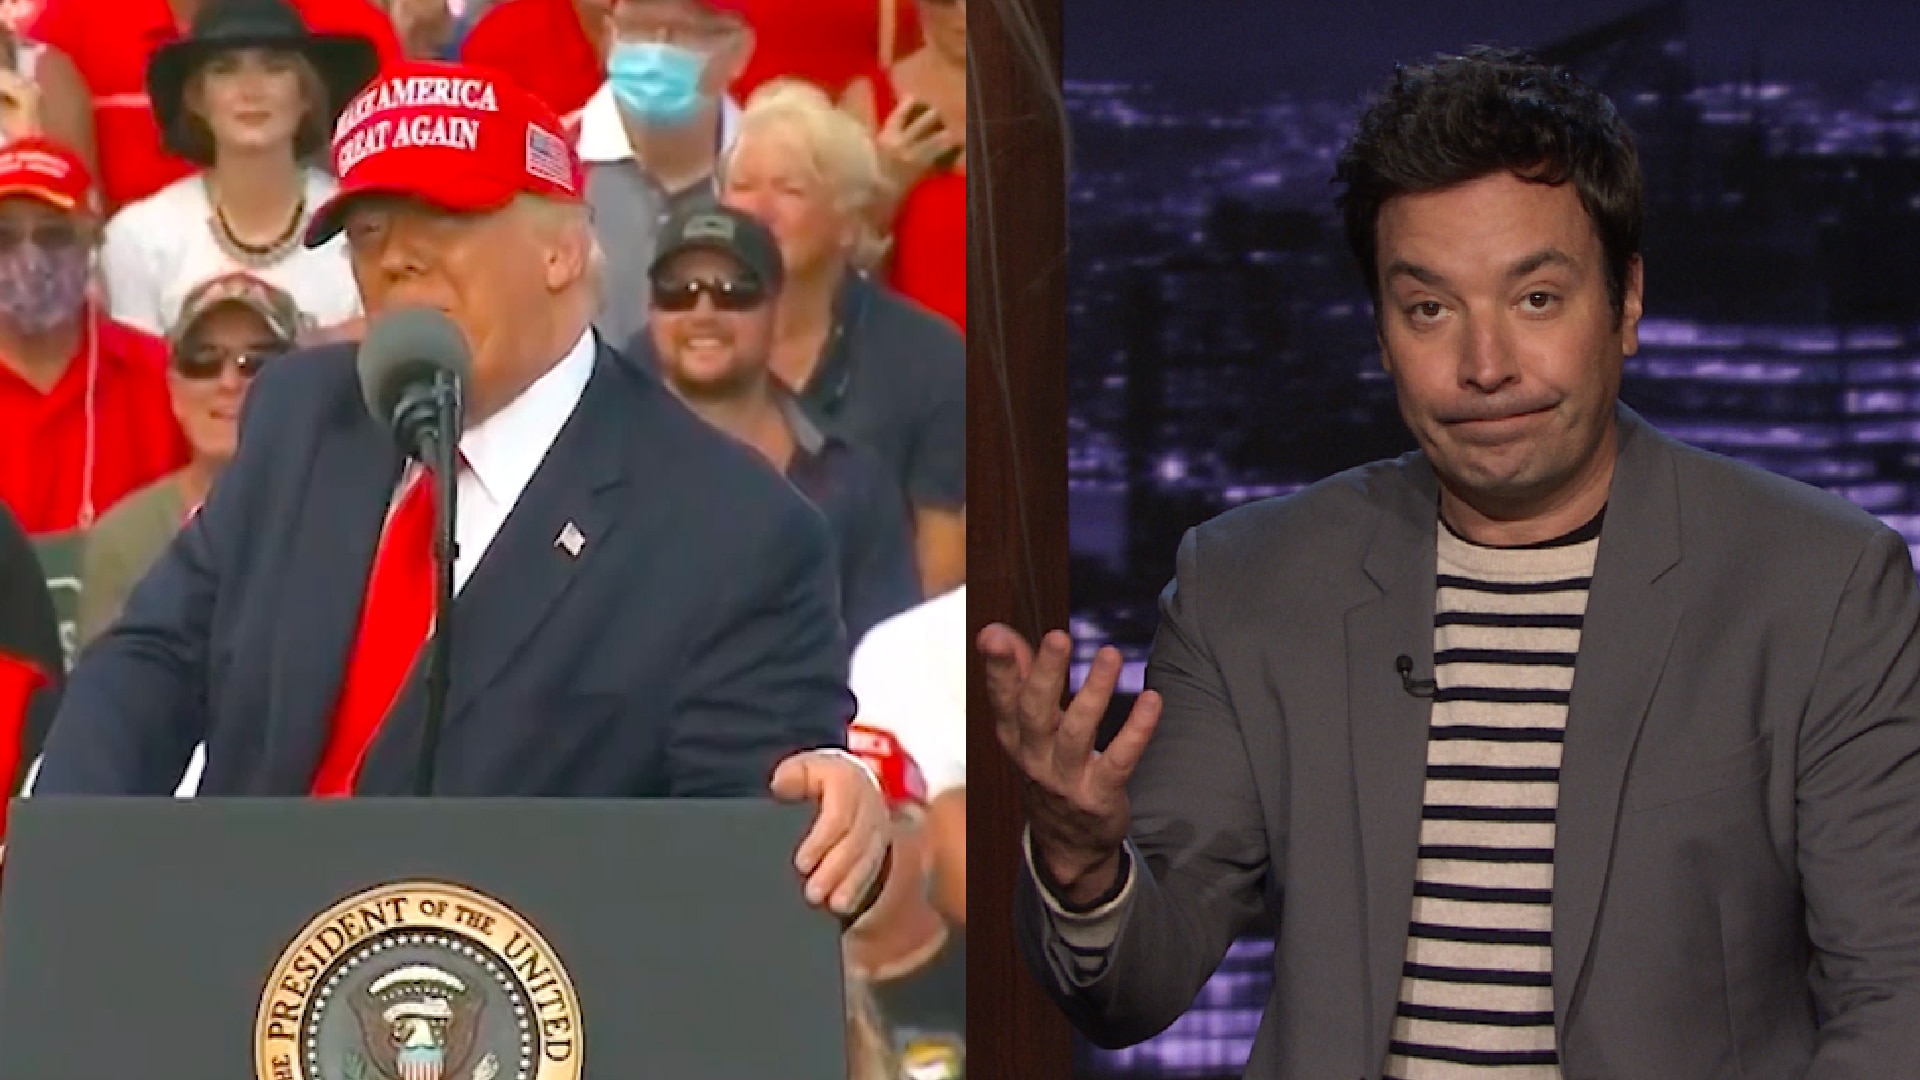 Watch The Tonight Show Starring Jimmy Fallon Highlight Trump Holds Yet Another Dangerous Rally